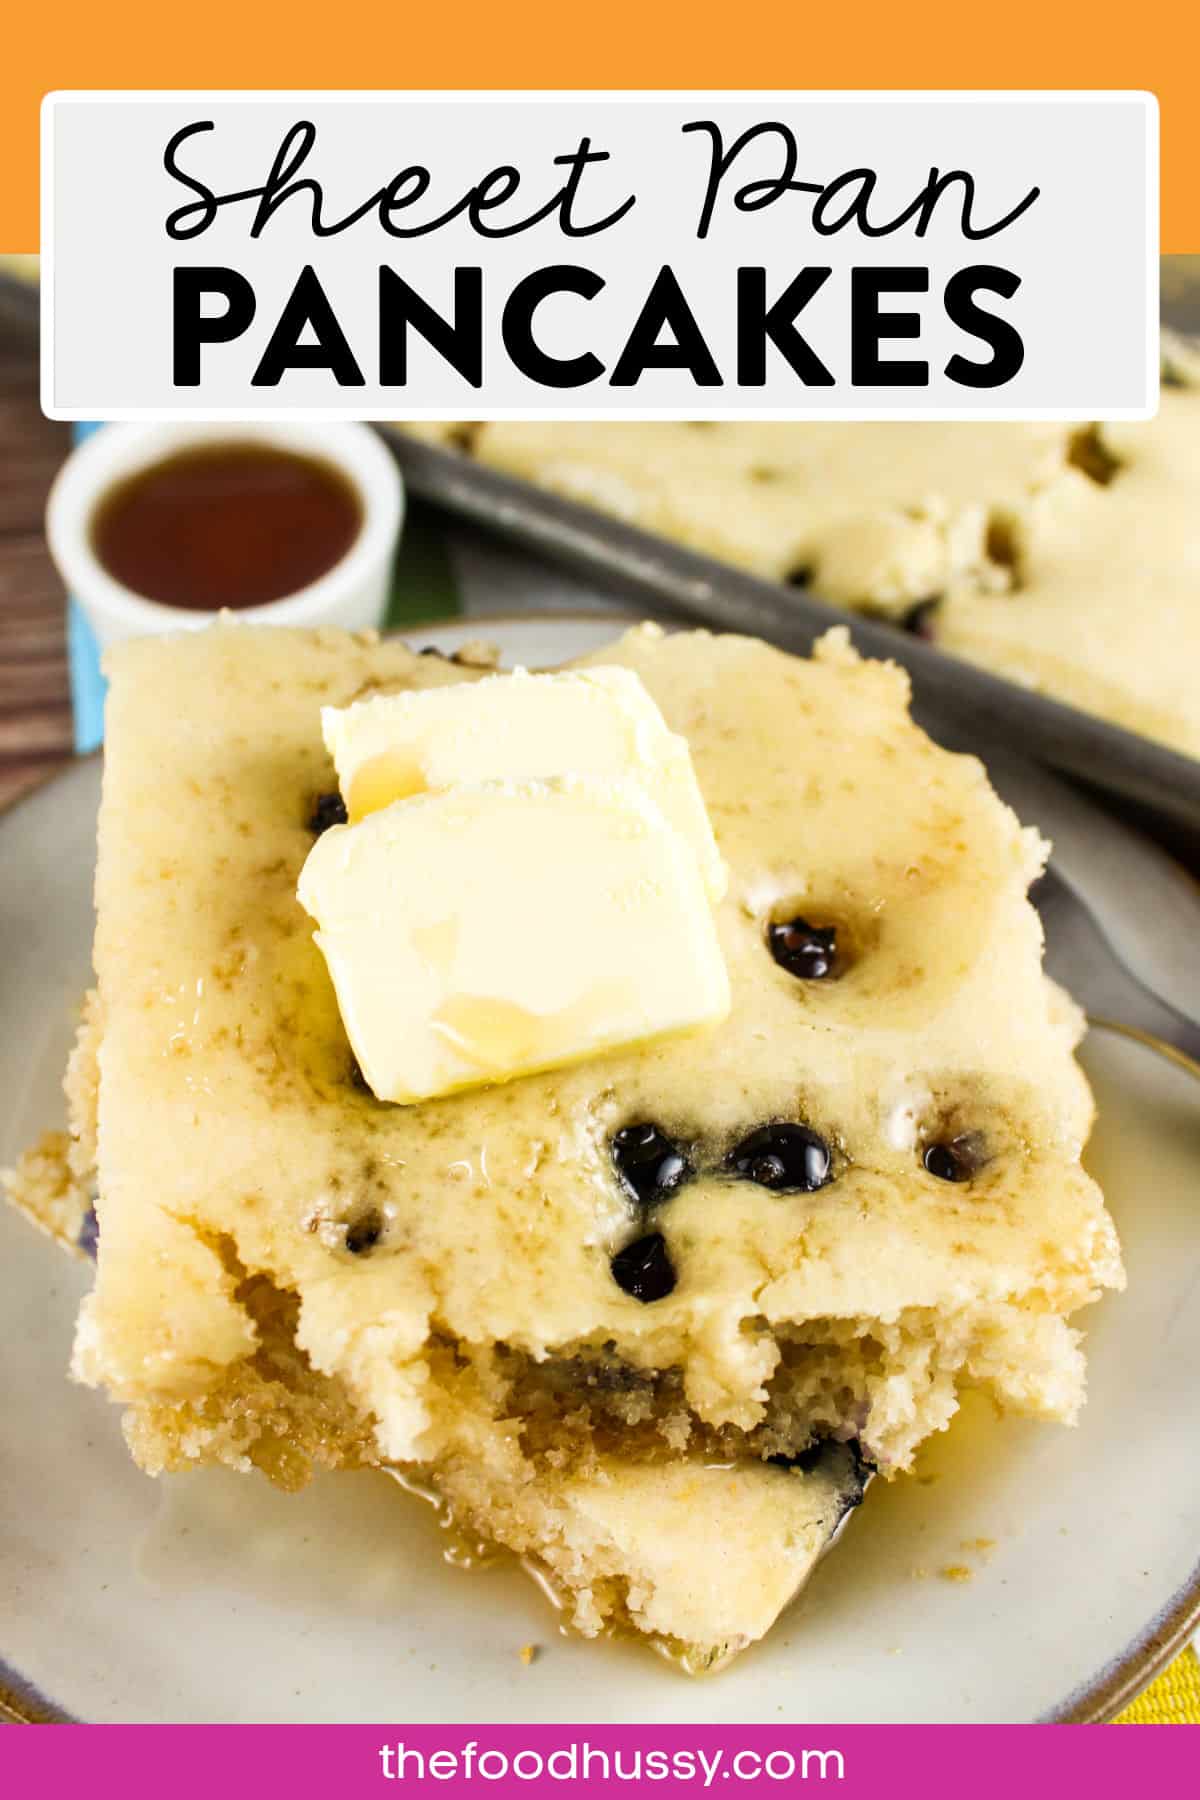 Making Sheet Pan Pancakes from a Mix is simpler and gets you a whole pan full of light & fluffy pancakes with no work! Load them up with toppings like blueberries or chocolate chips to make everyone happy and ready to dig in! via @foodhussy